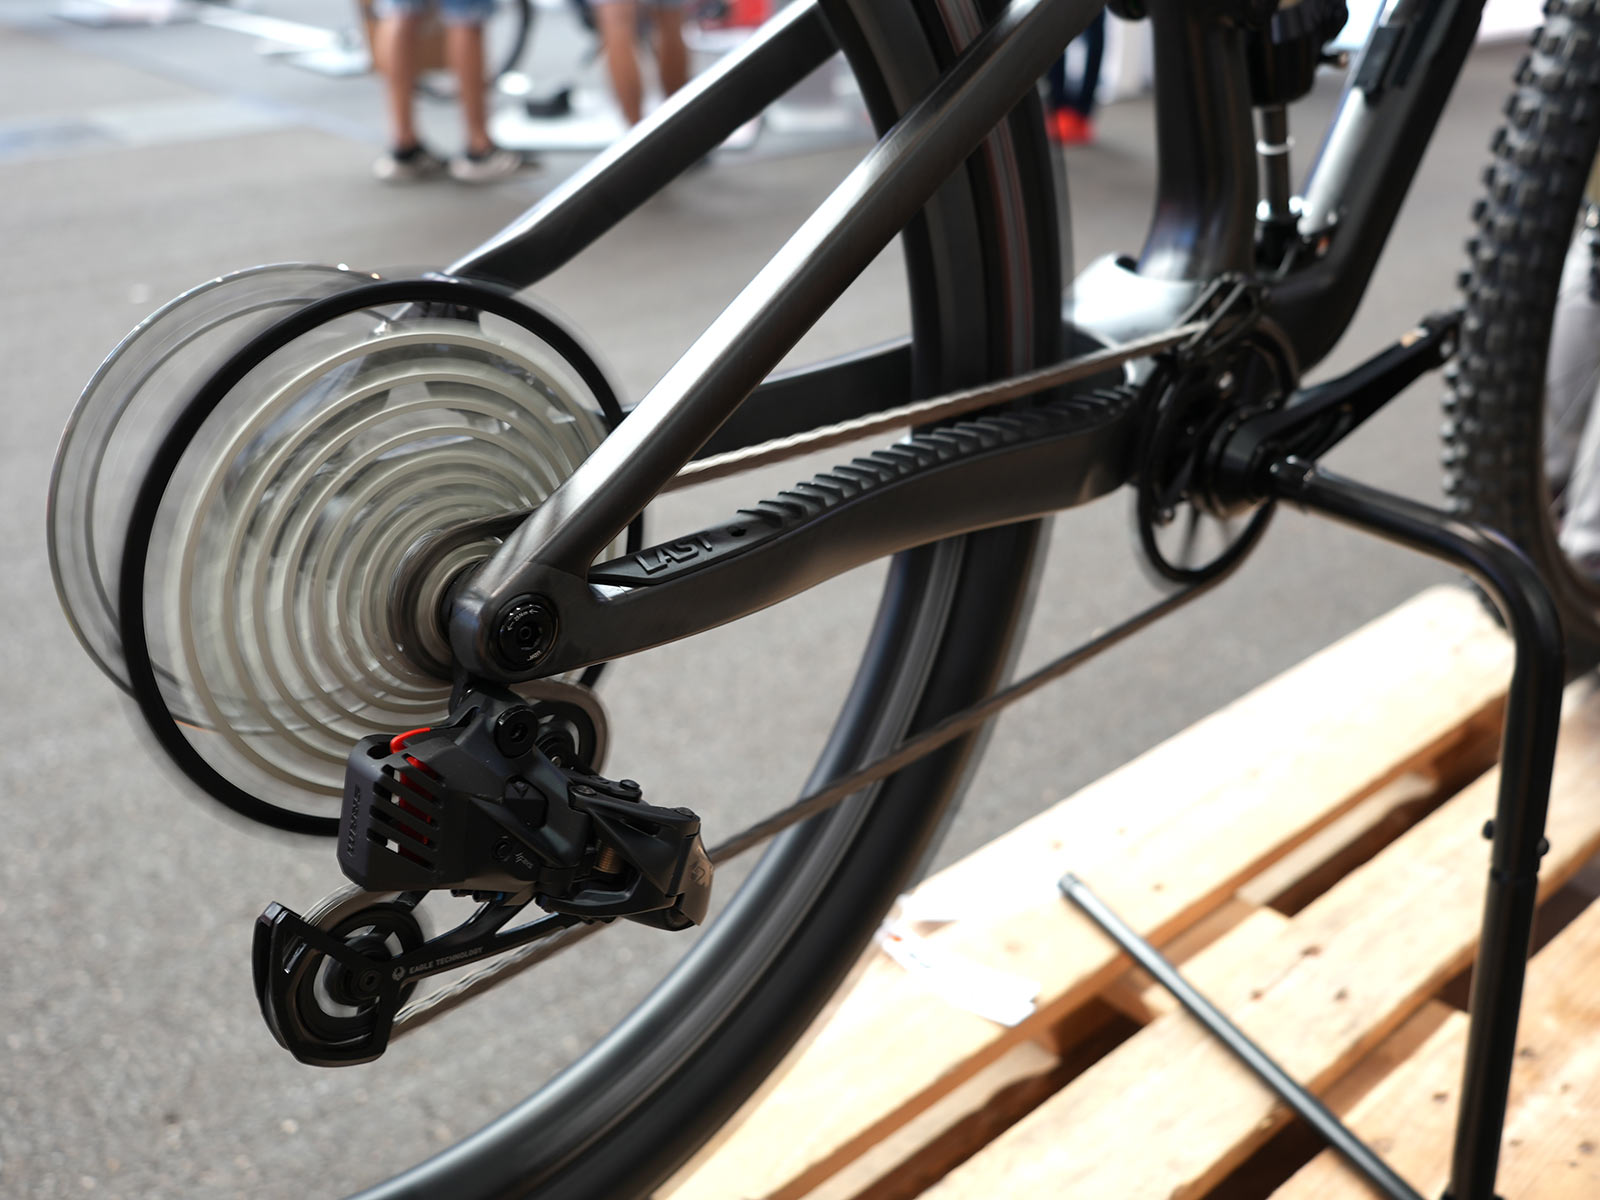 Intend adds a freewheel to their cranks, letting you shift without pedaling